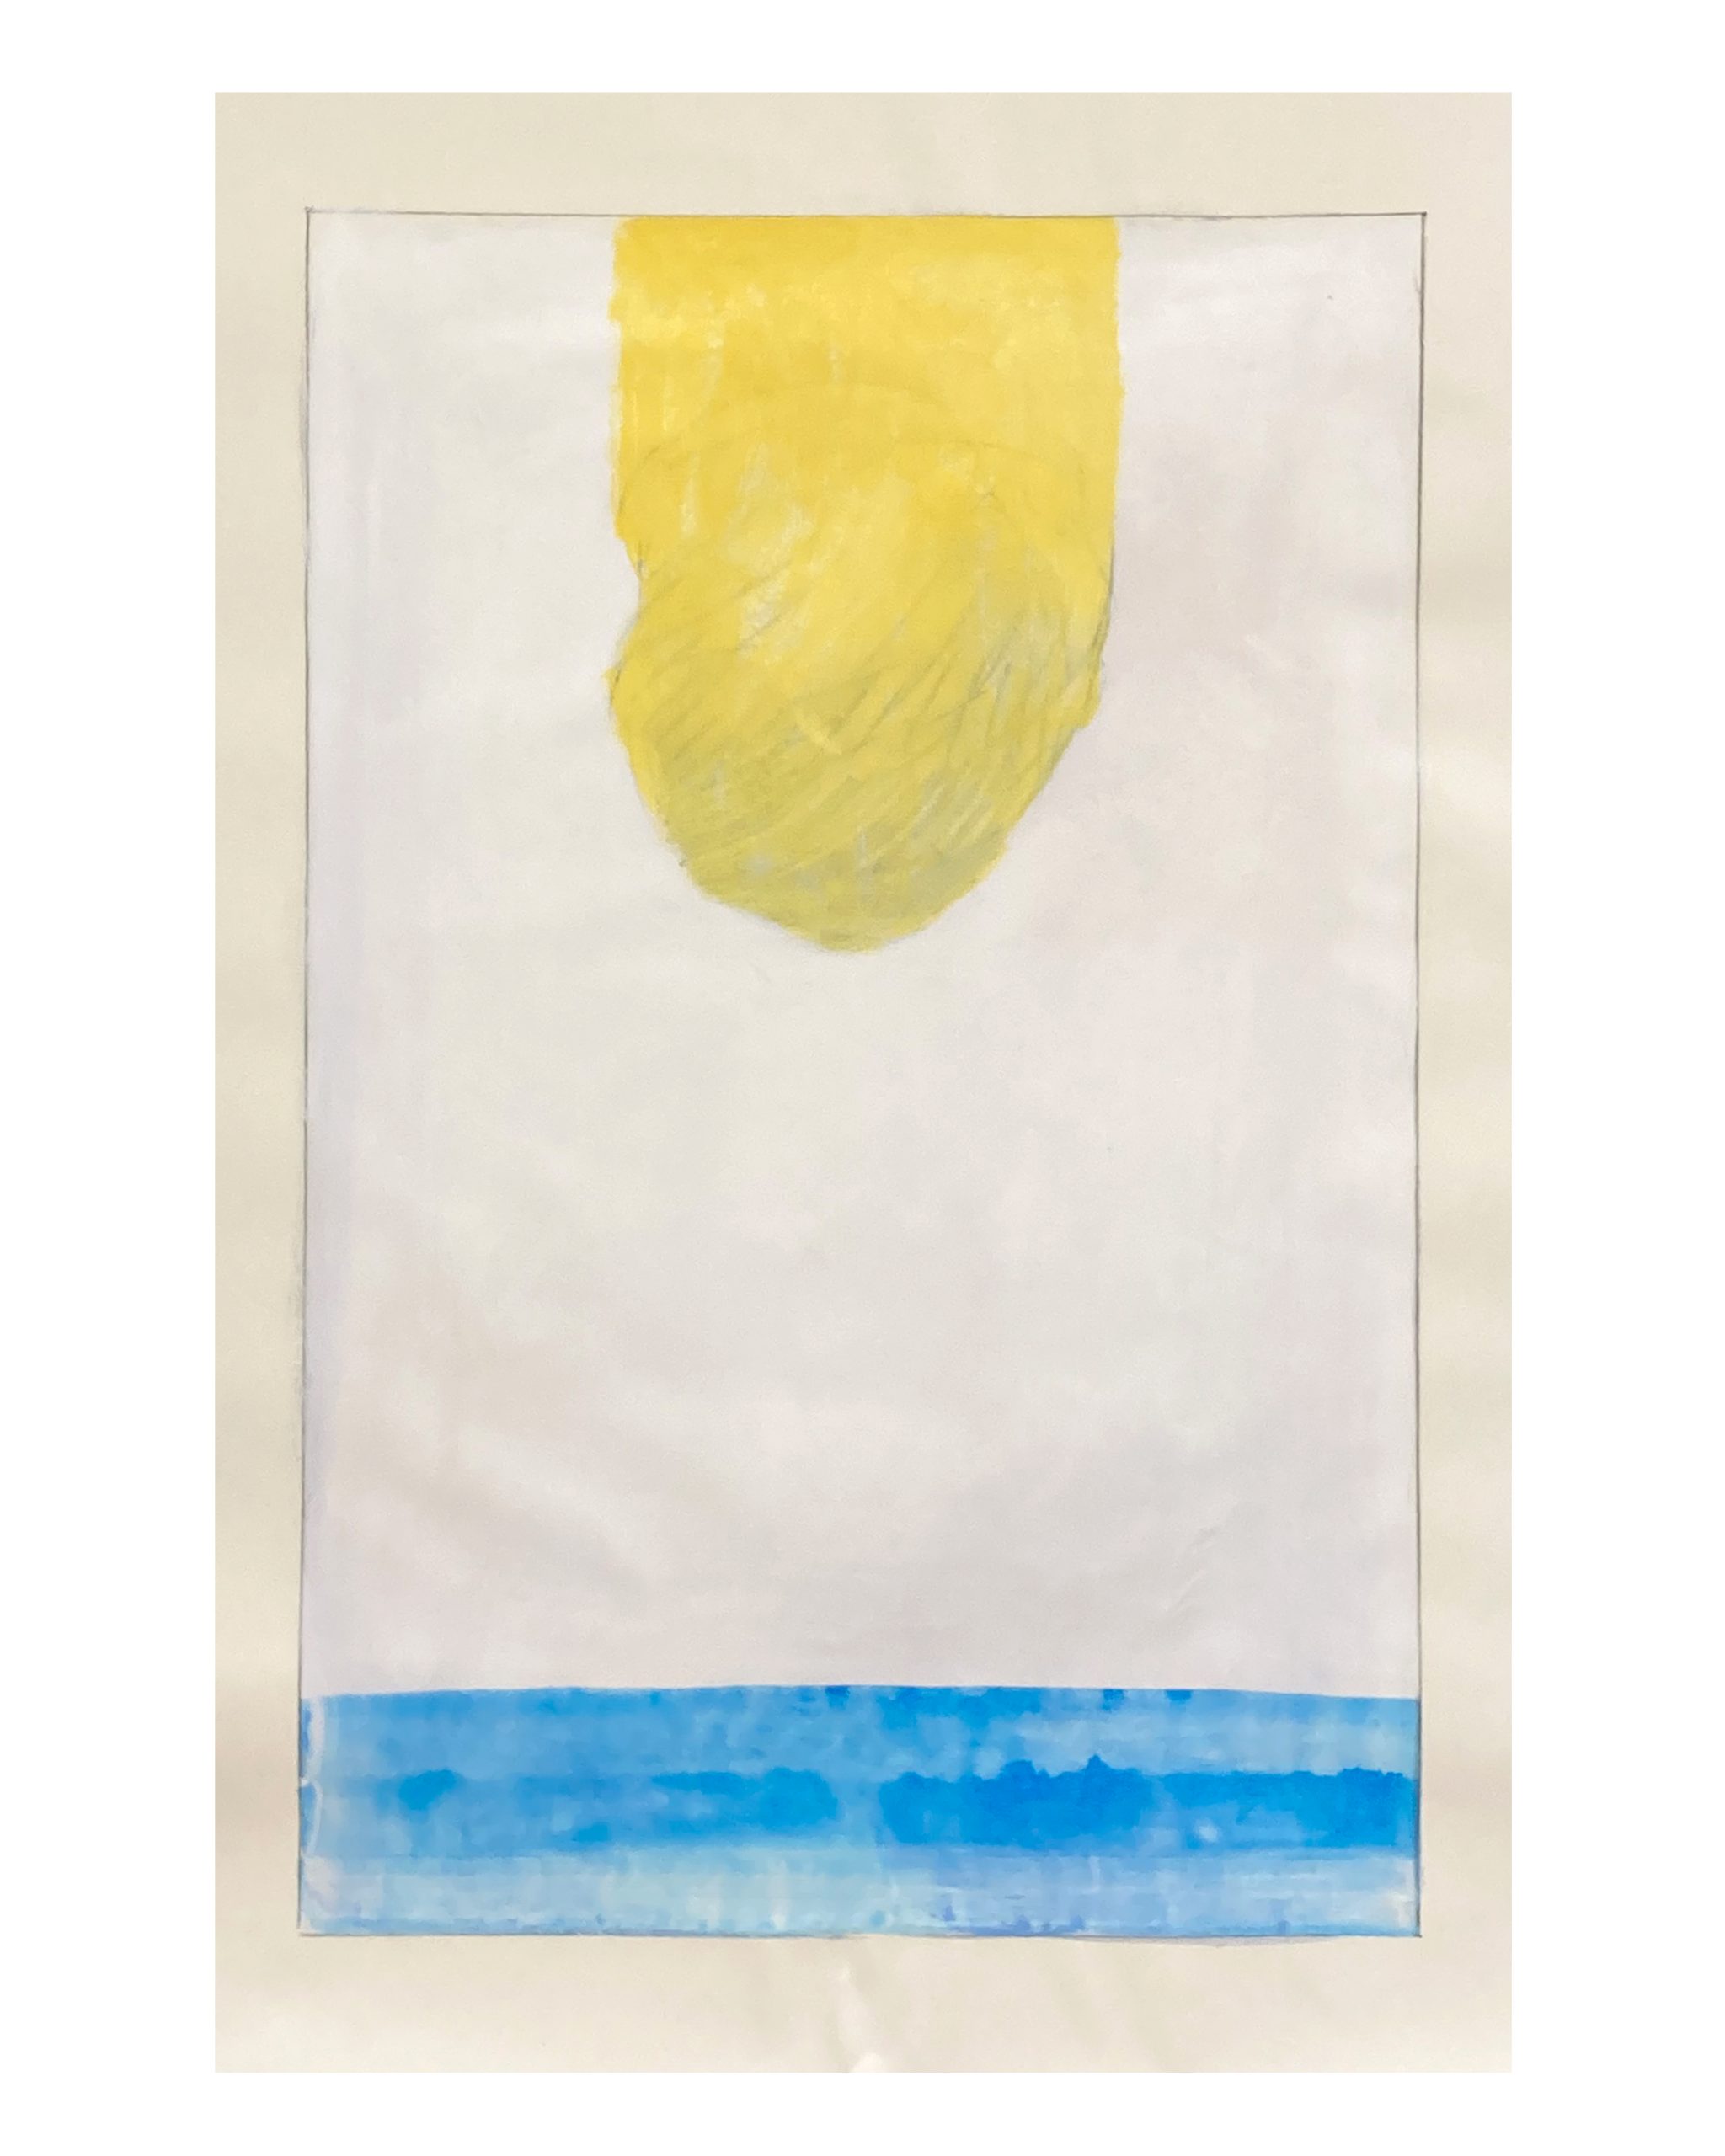 Adrian Johnston-Upside Down-Yellow and Blue1